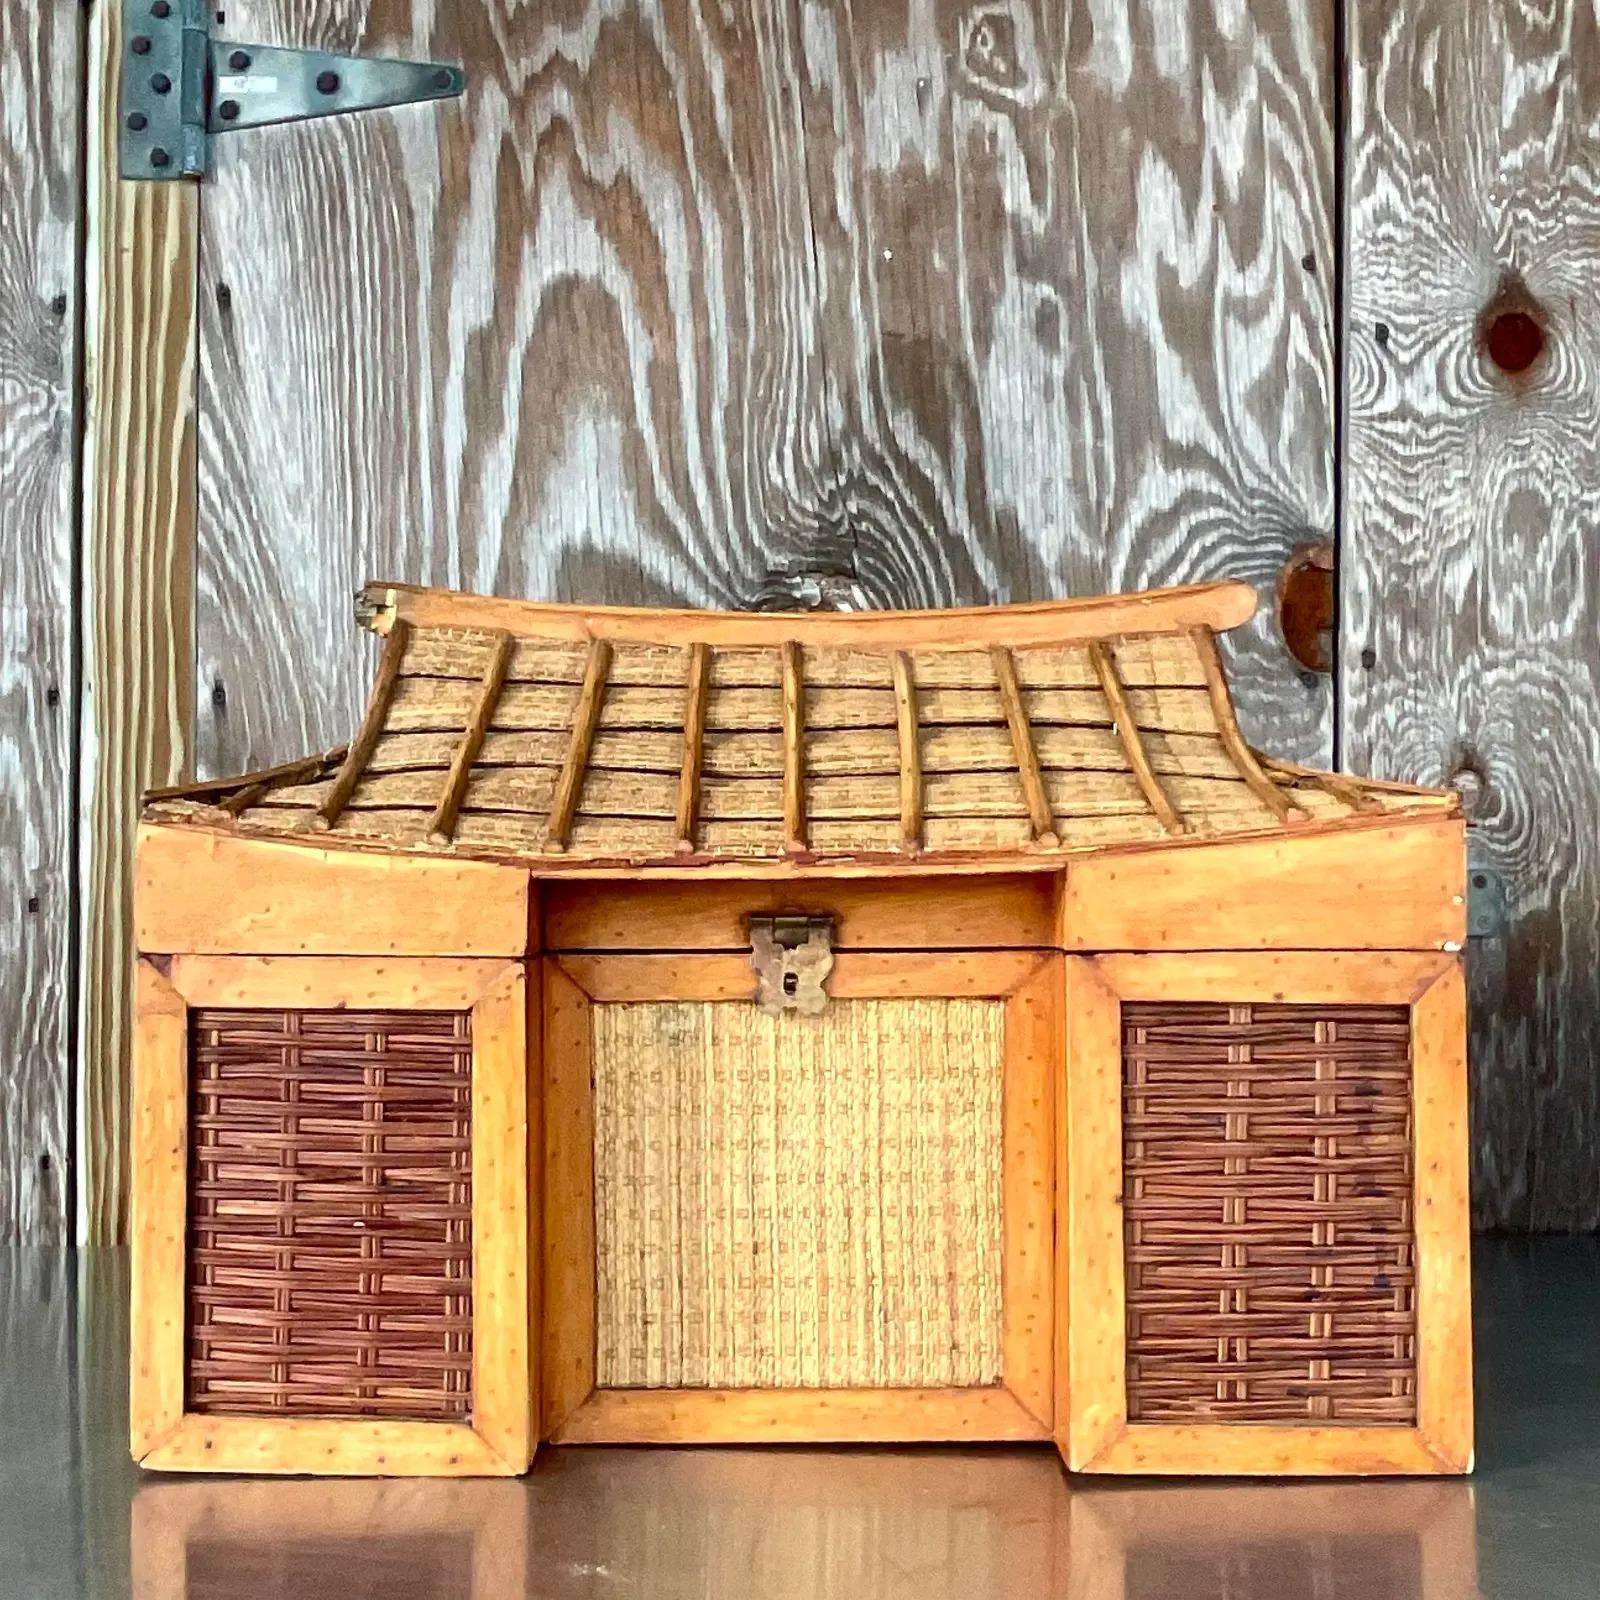 An incredible vintage Boho woven rattan trunk. A chic pagoda shape that open at the roofline. Really unusual and beautiful. Acquired from a Palm Beach estate.